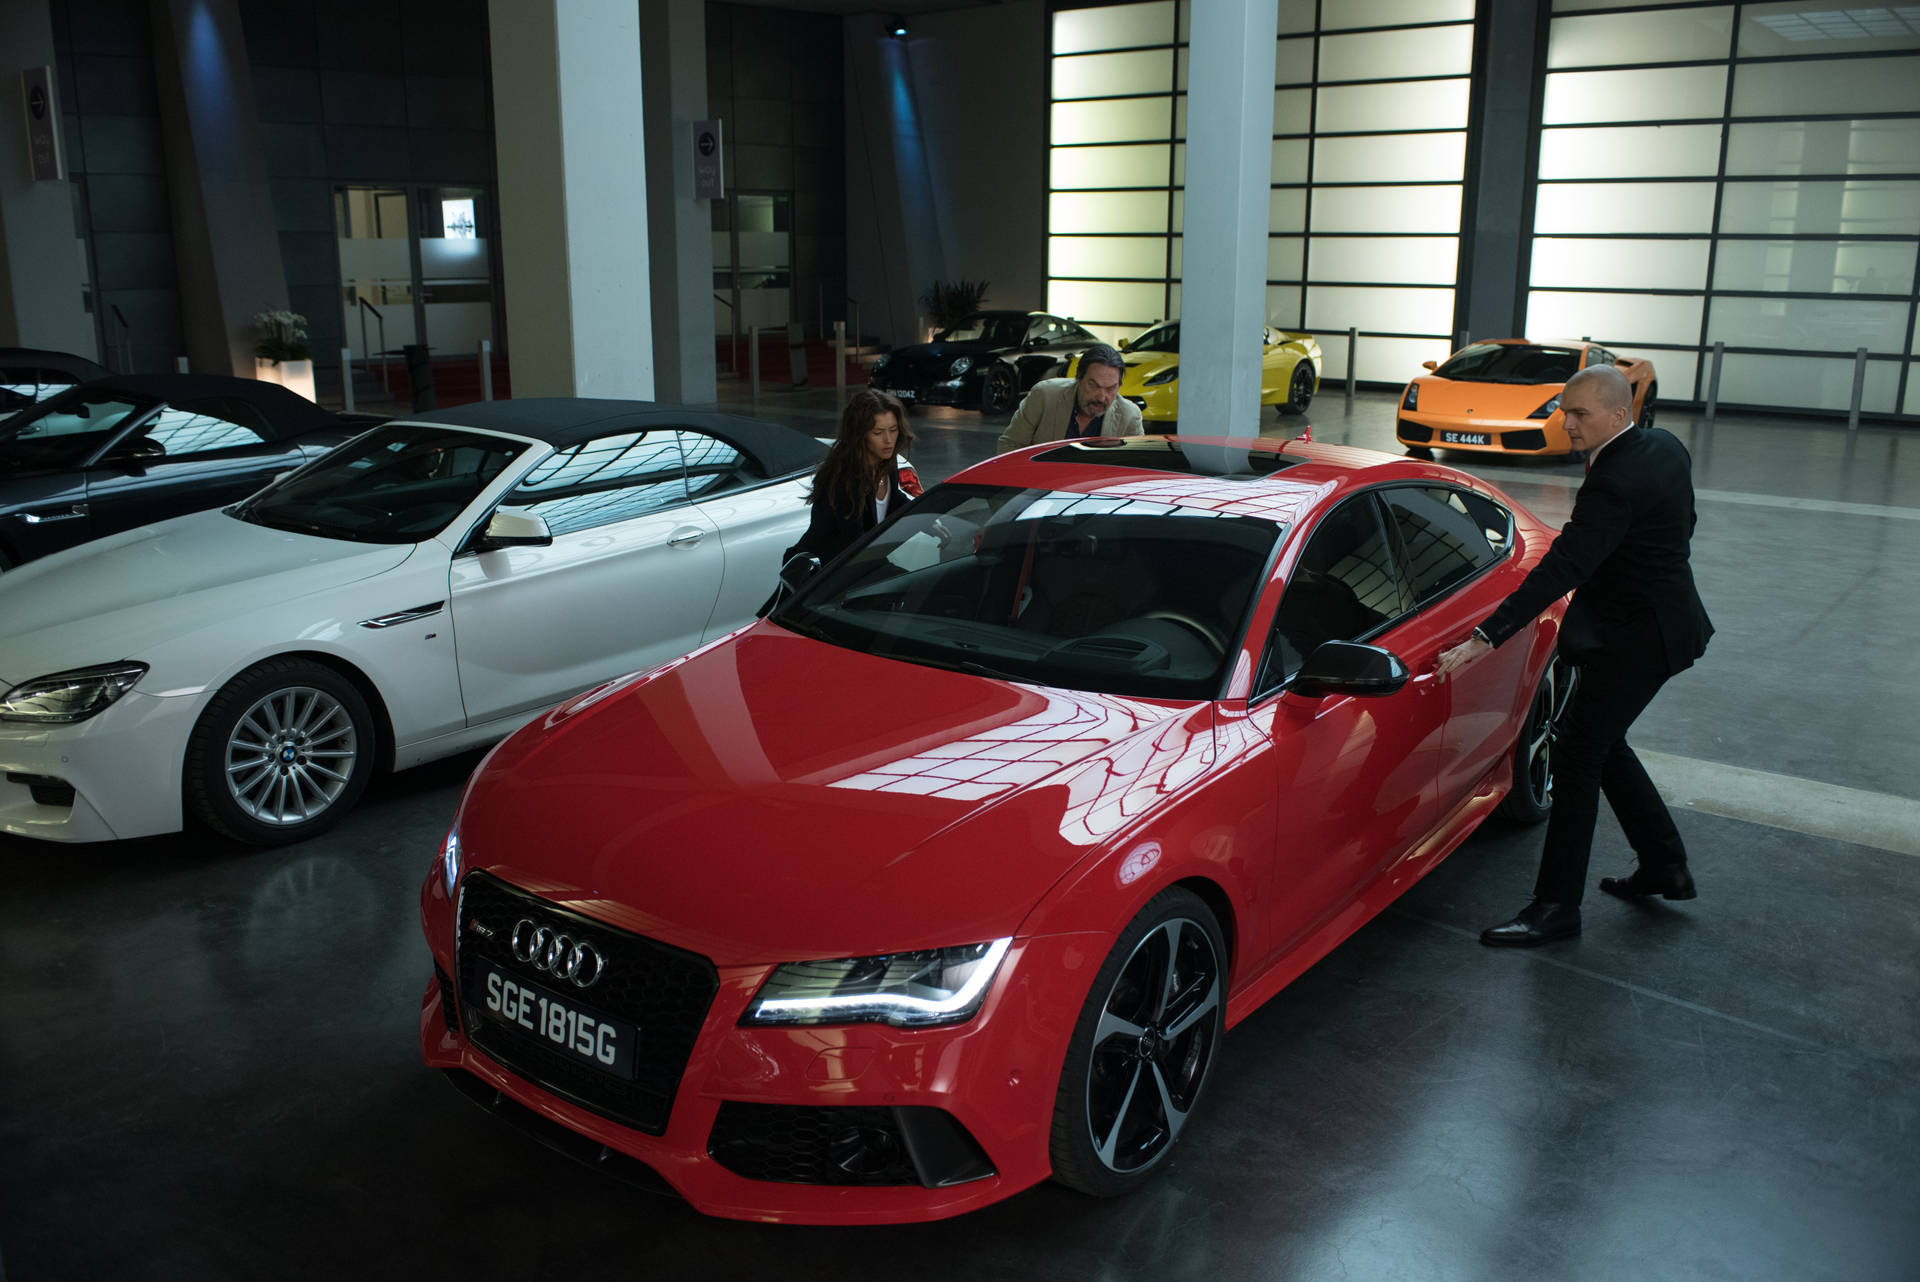 Audi Red Luxury Ciarán Hinds Wallpaper